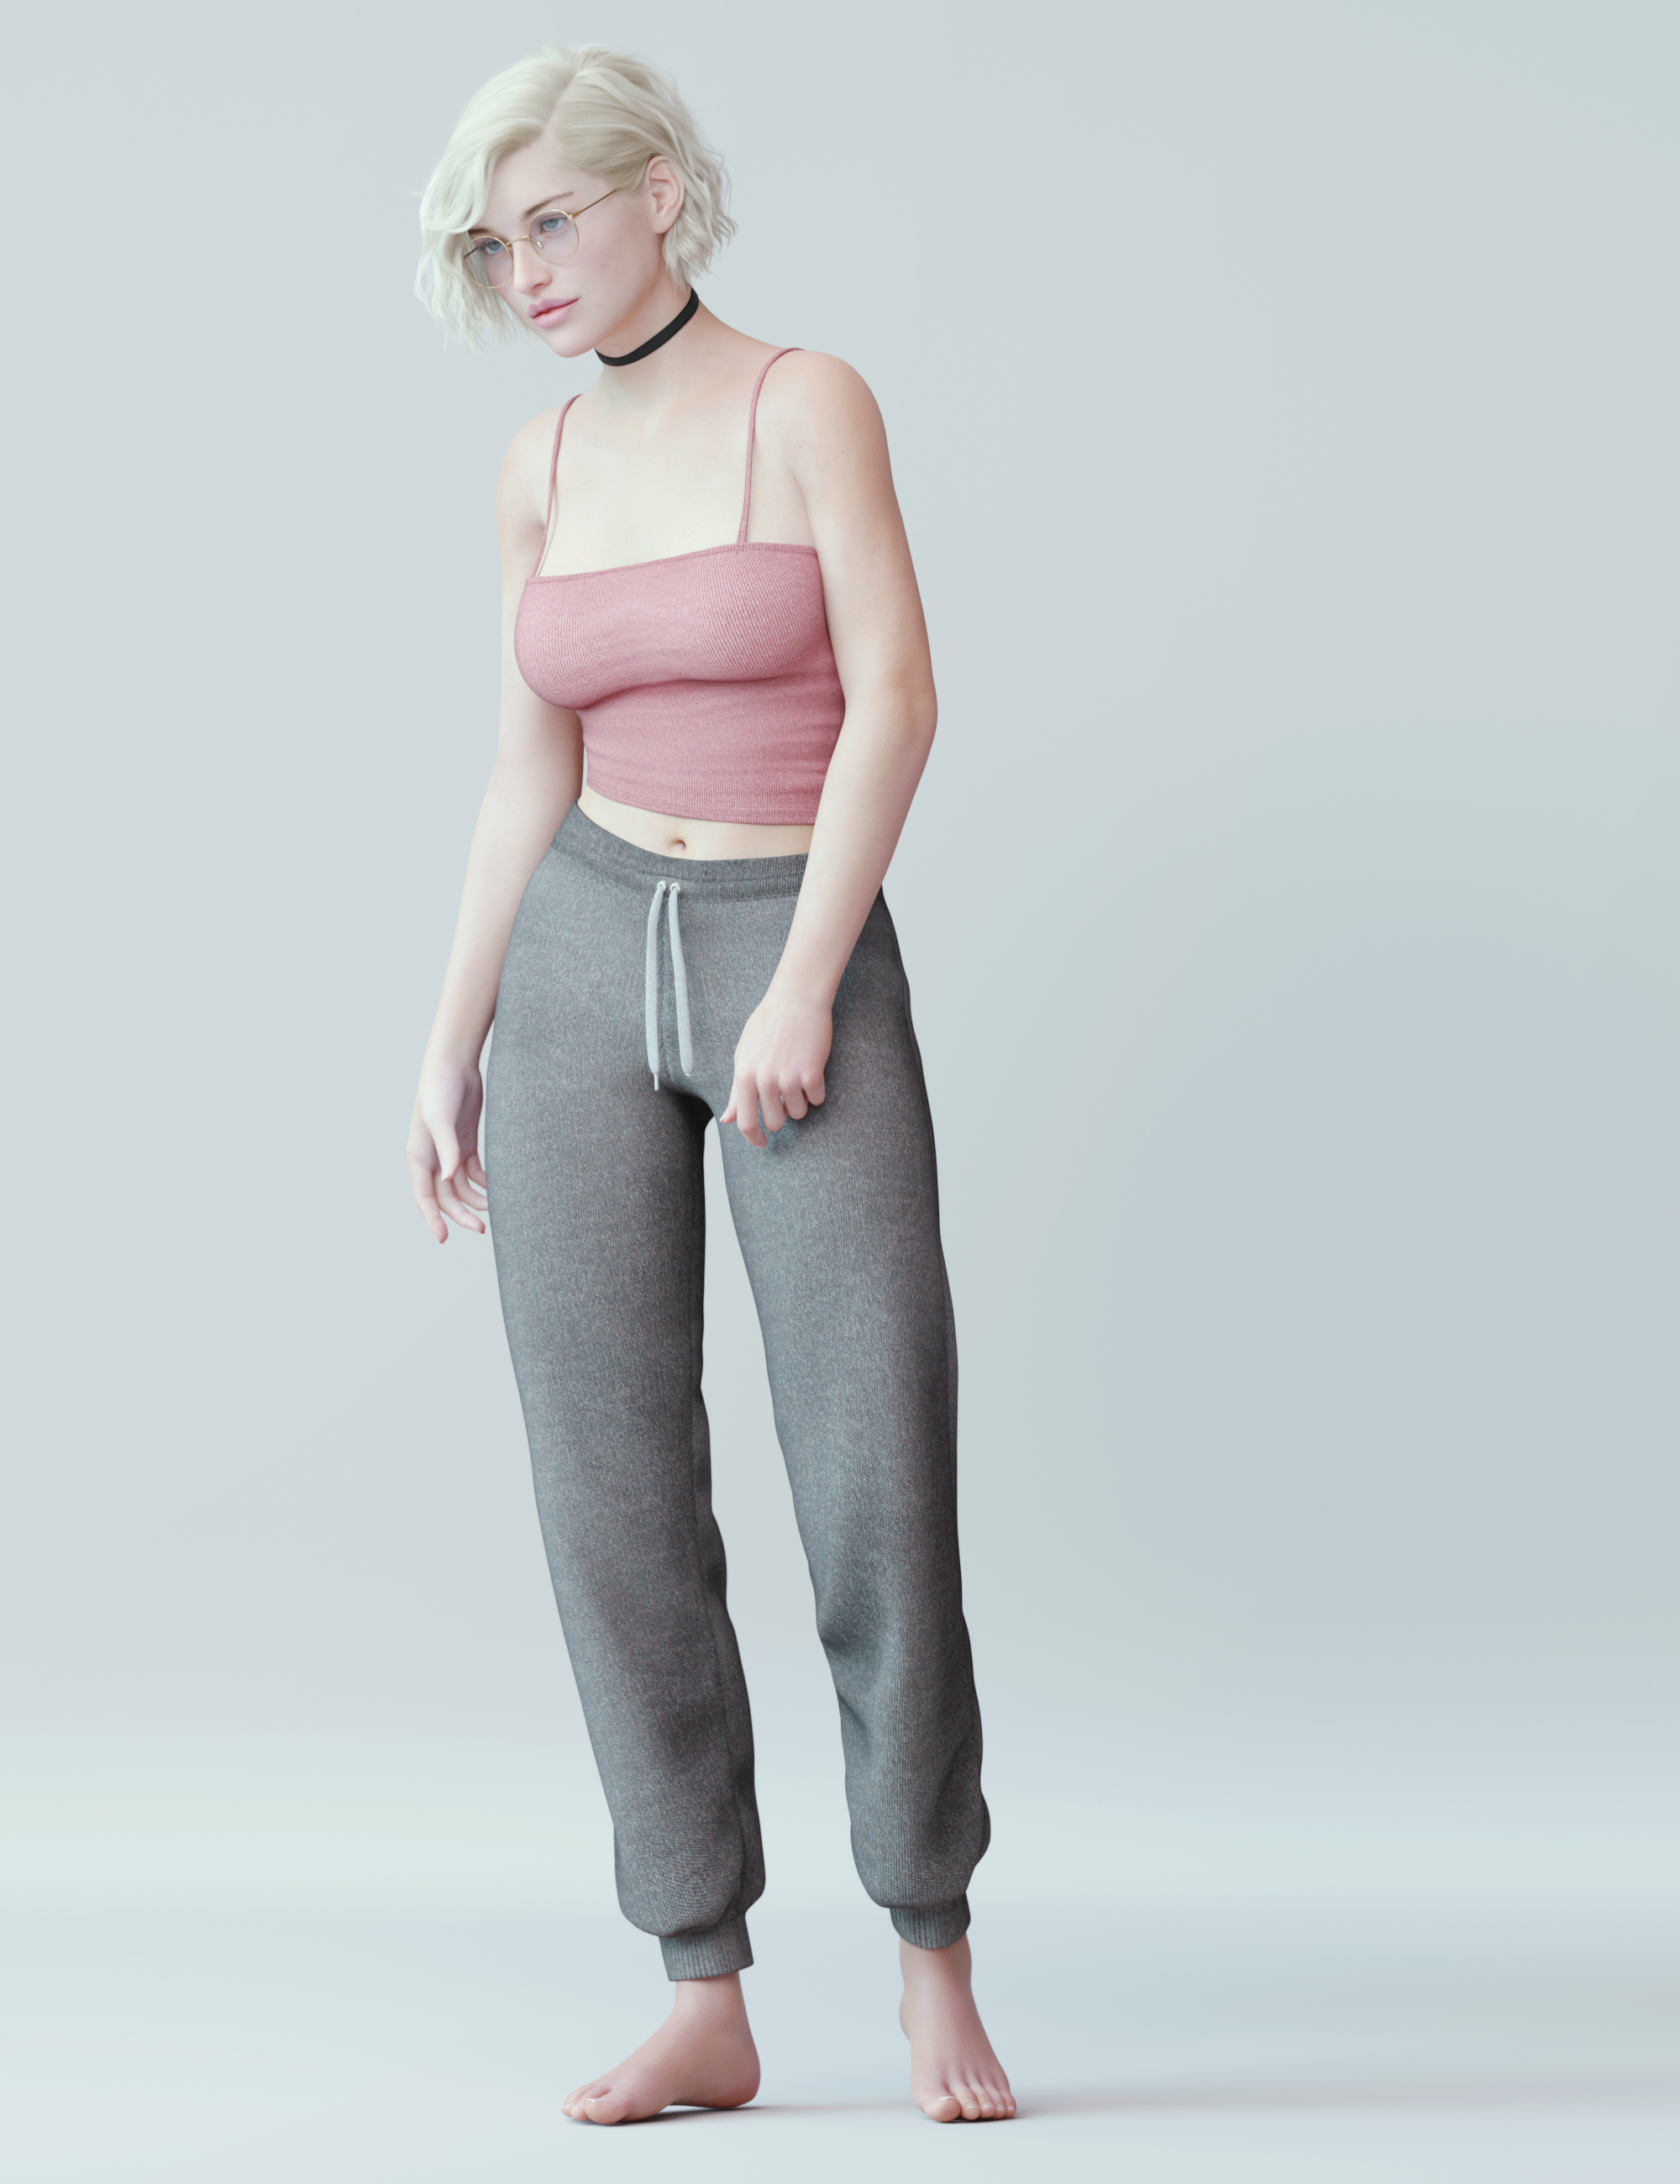 Dforce Midday Outfit For Genesis 8 Female S Daz 3d